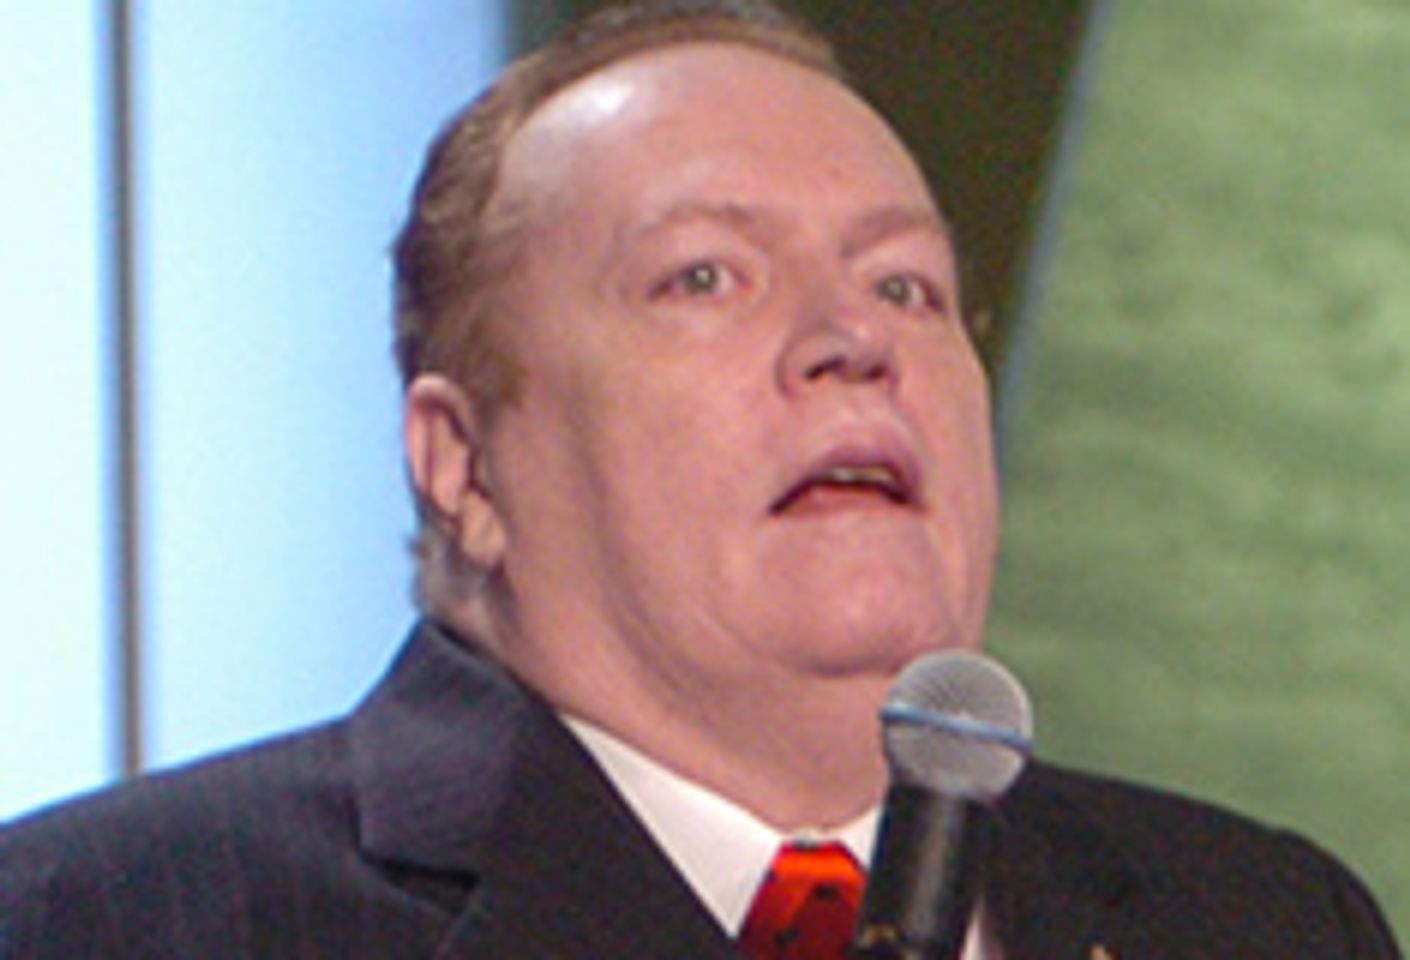 Larry Flynt Documentary Screens in L.A.